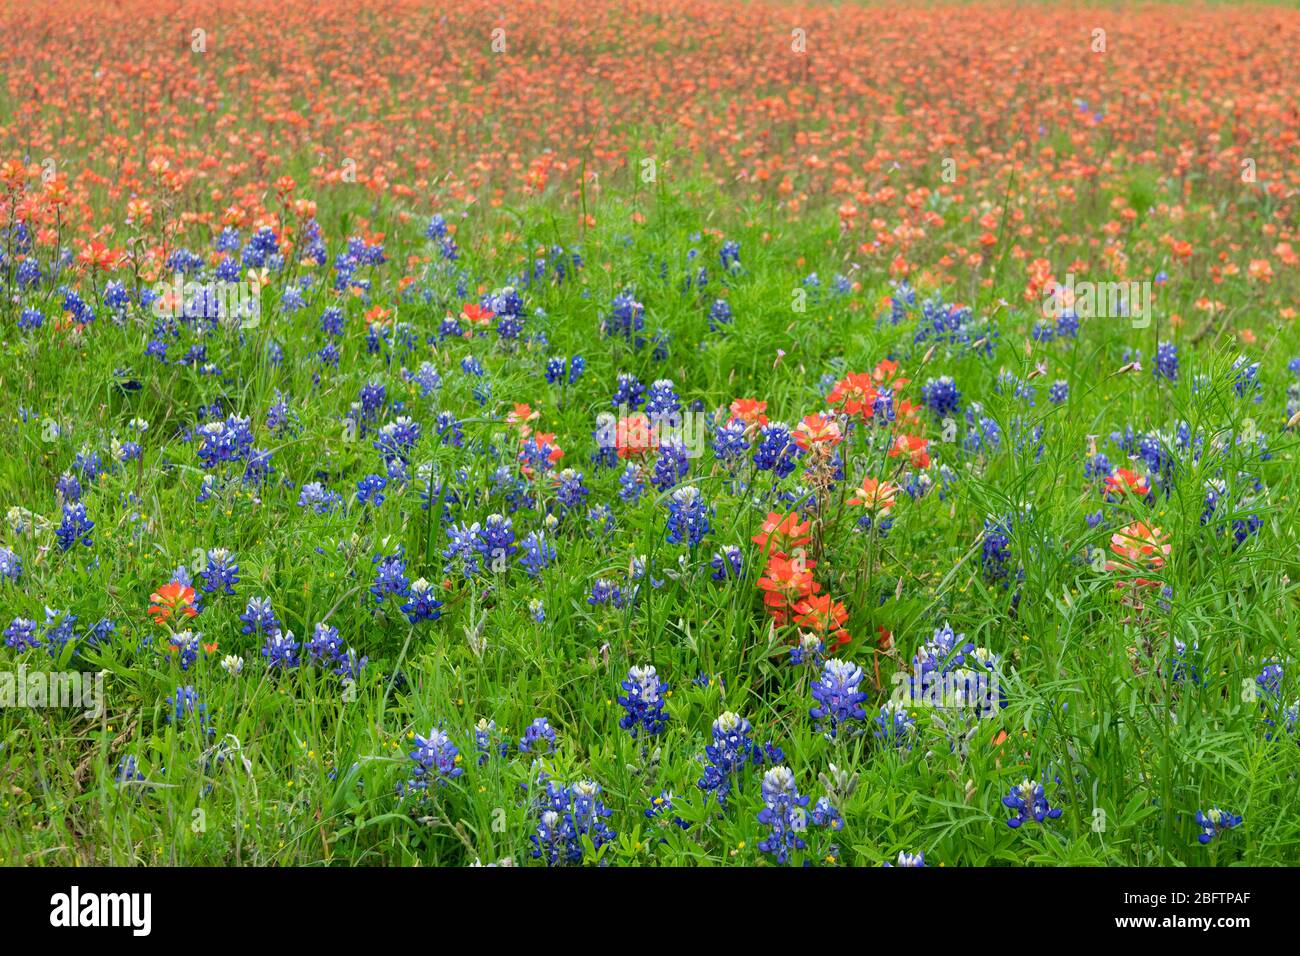 Beautiful Texas Bluebonnet flowers growing in a patch of grass with a vibrant, orange blanket of Indian Paintbrush flowers filling the background. Stock Photo